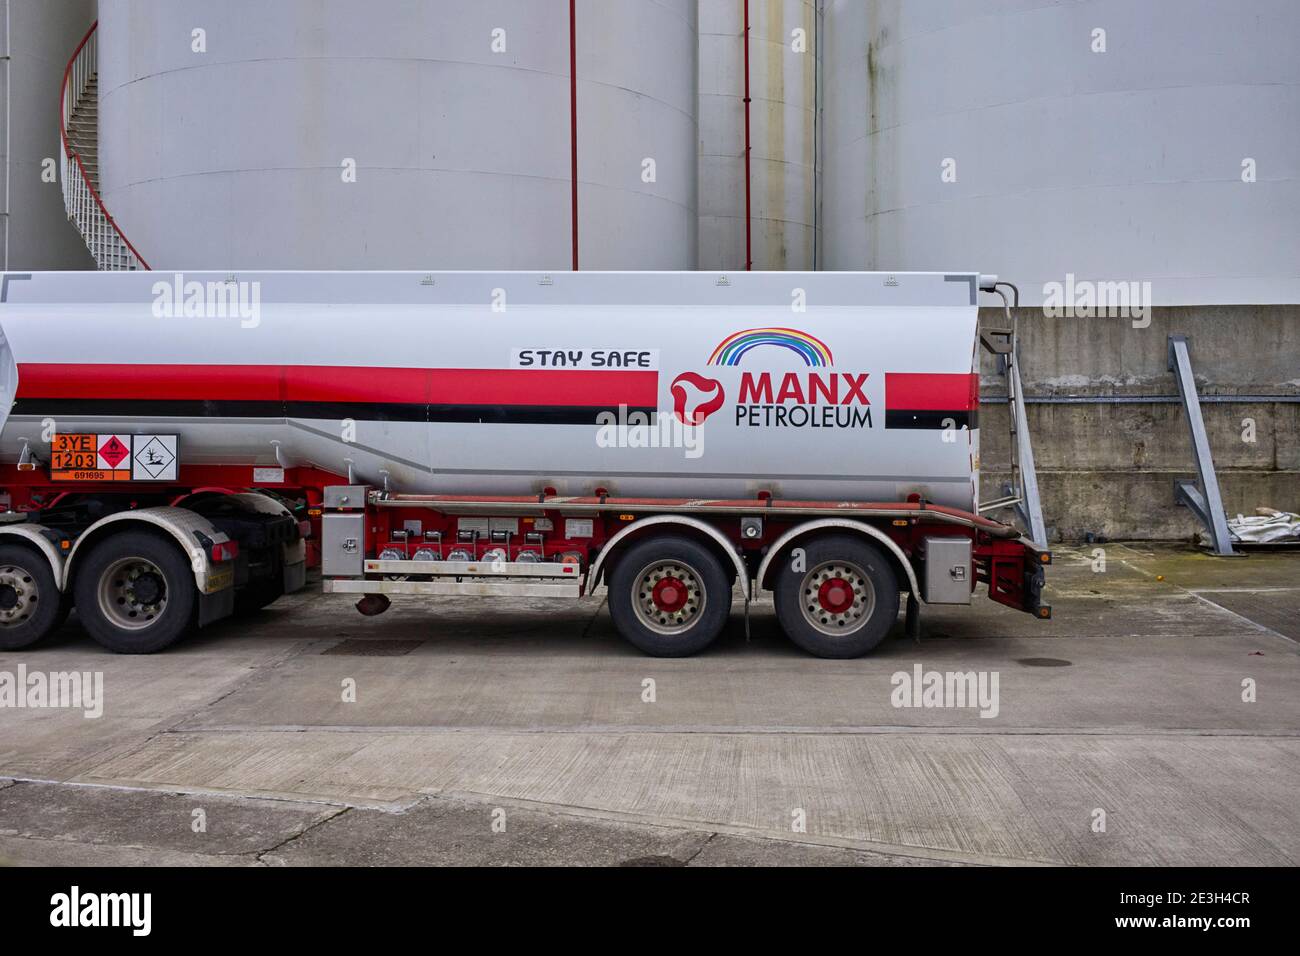 Manx petroleum lorry with Stay Safe and NHS rainbow logo added Stock Photo